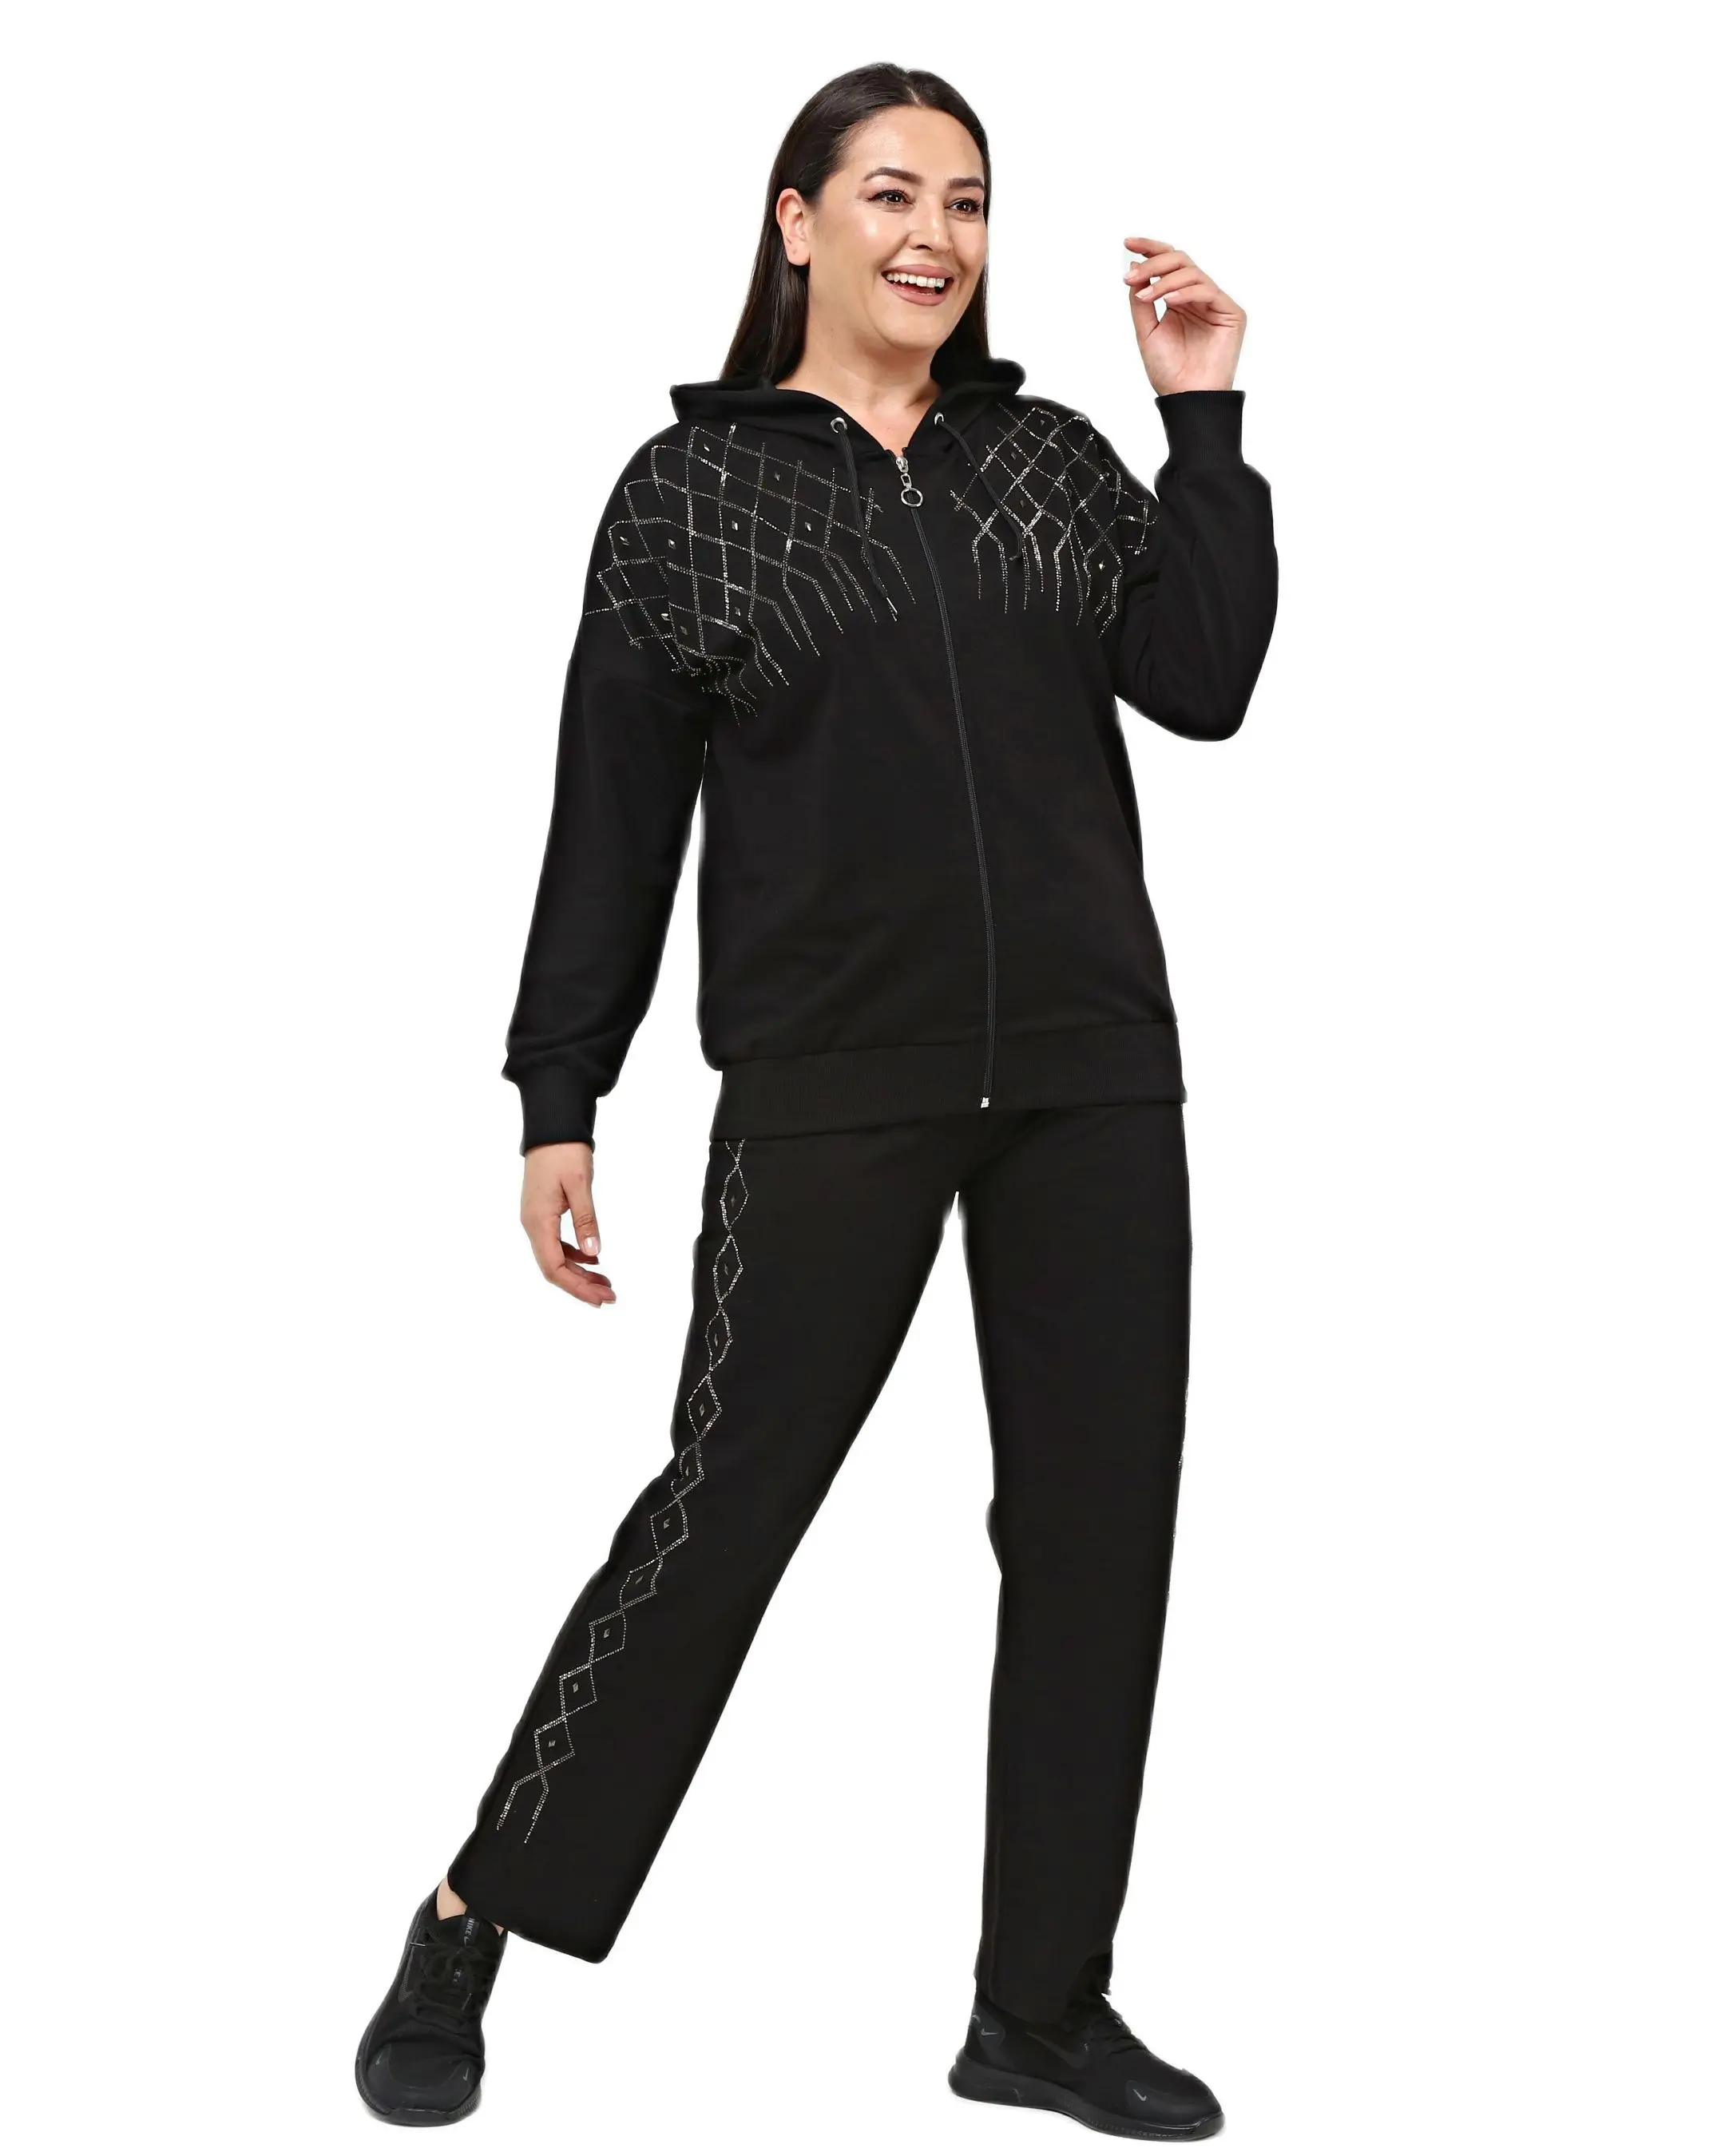 Women’s Plus Size Black Sweatsuit Set 2 Piece Rhombus Stone Print Tracksuit, Designed and Made in Turkey, New Arrival